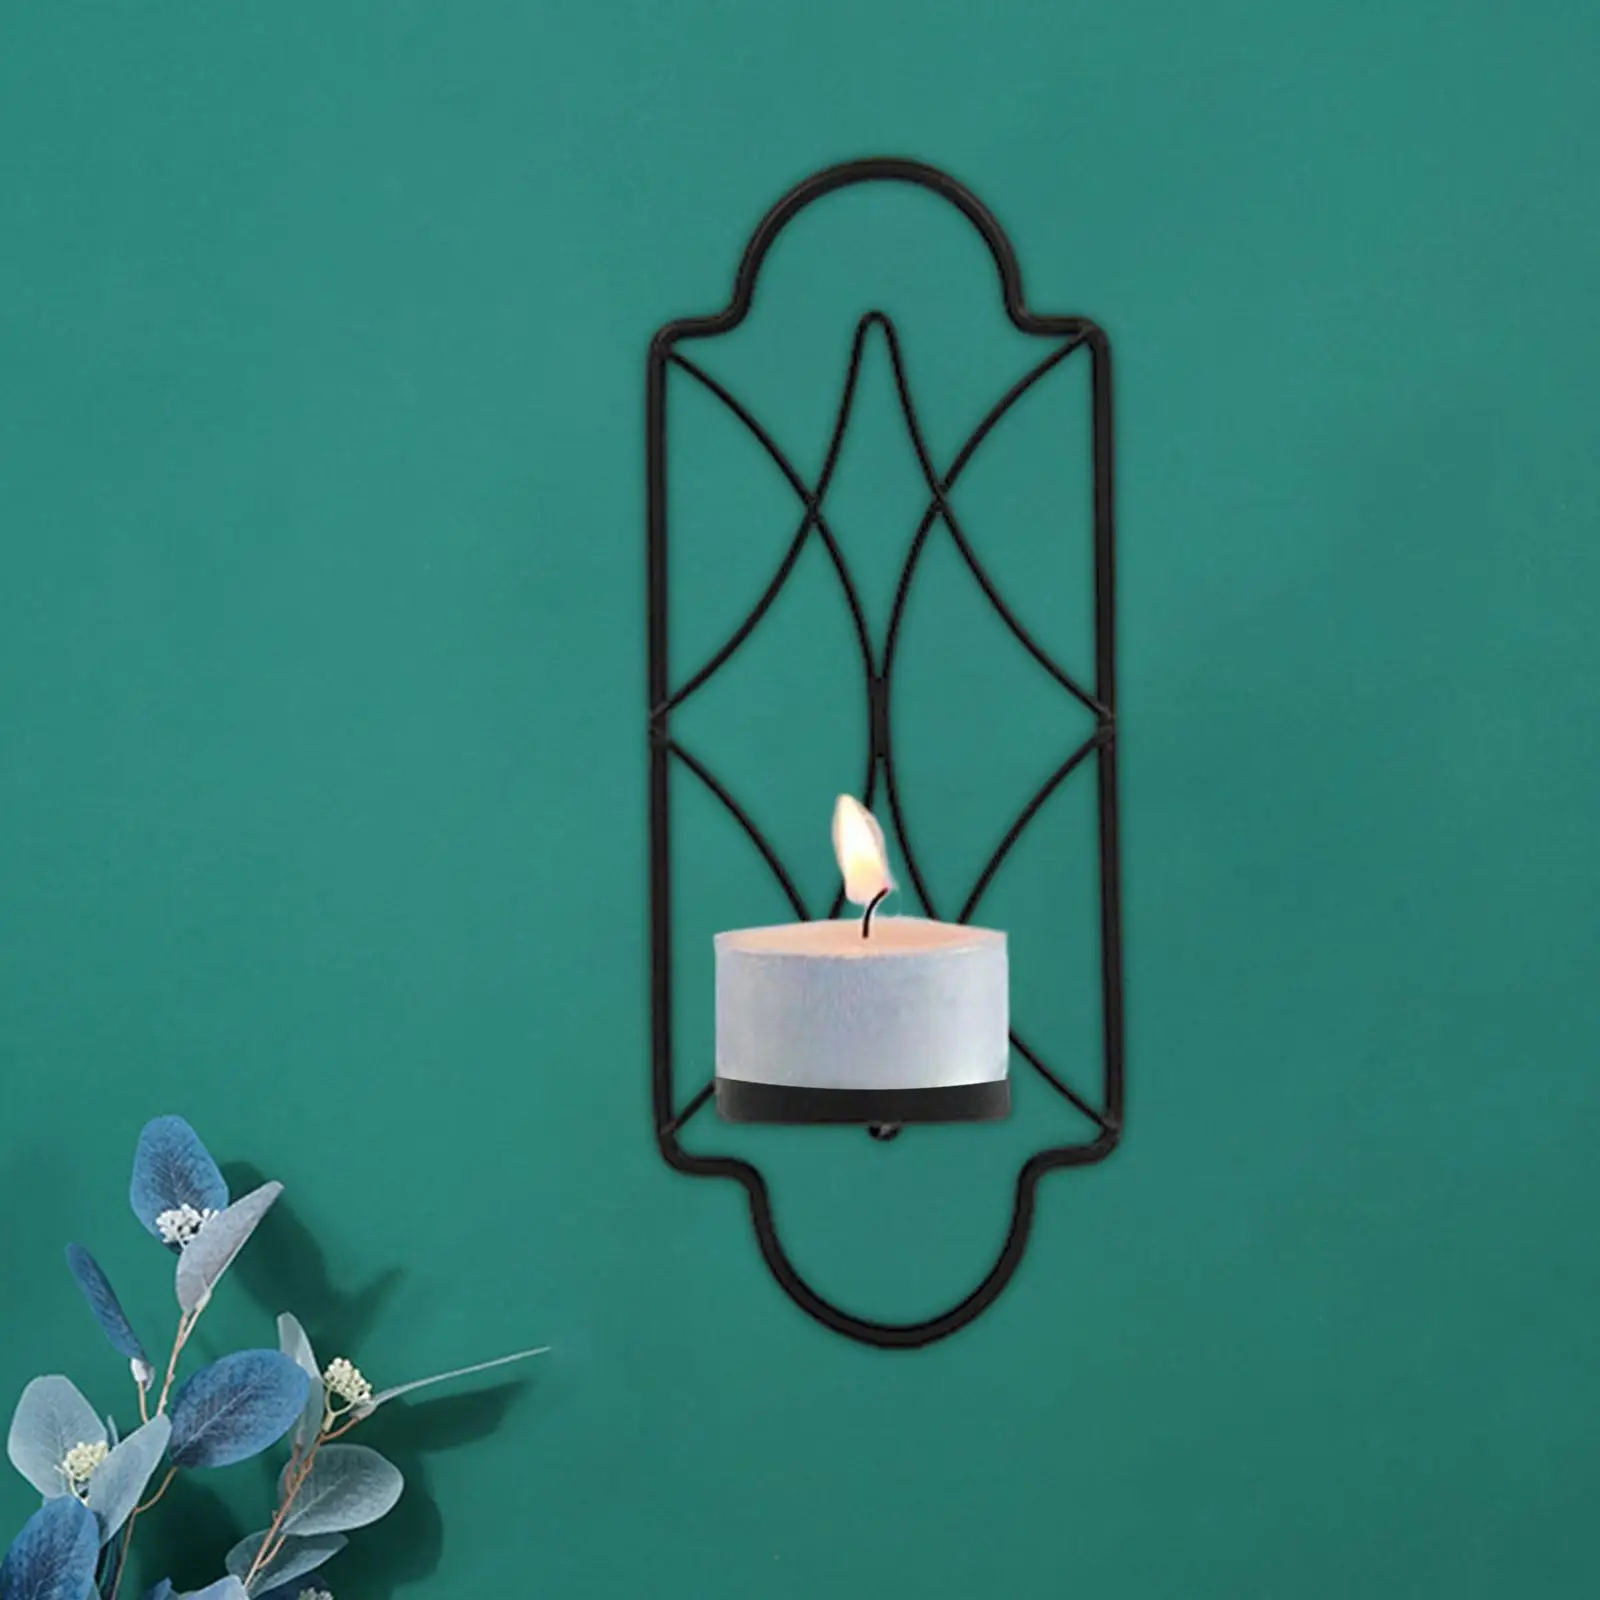 Metal Wall Hanging Sconce Candle Holder 3.5inchx8.6inch Candlesticks Holder Tealight Holder for Home Porch Decor Stylish